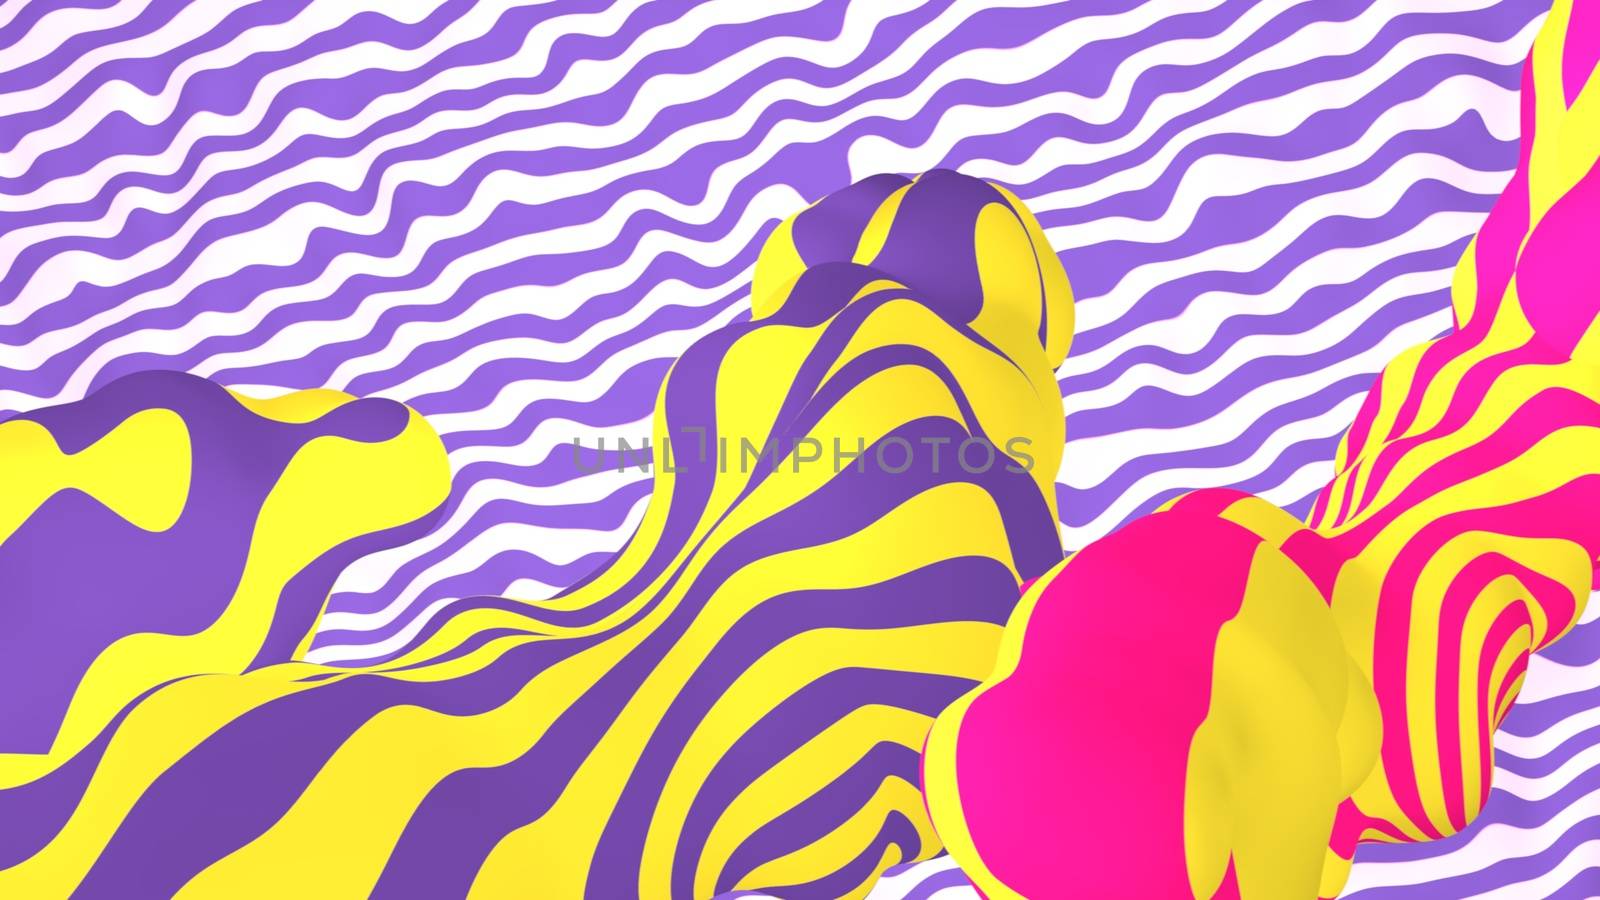 Enigmatic opt art 3d illustration of waving violet and white surface with an ogre looking creature camouflaging under yellow, rosy and violet waves.